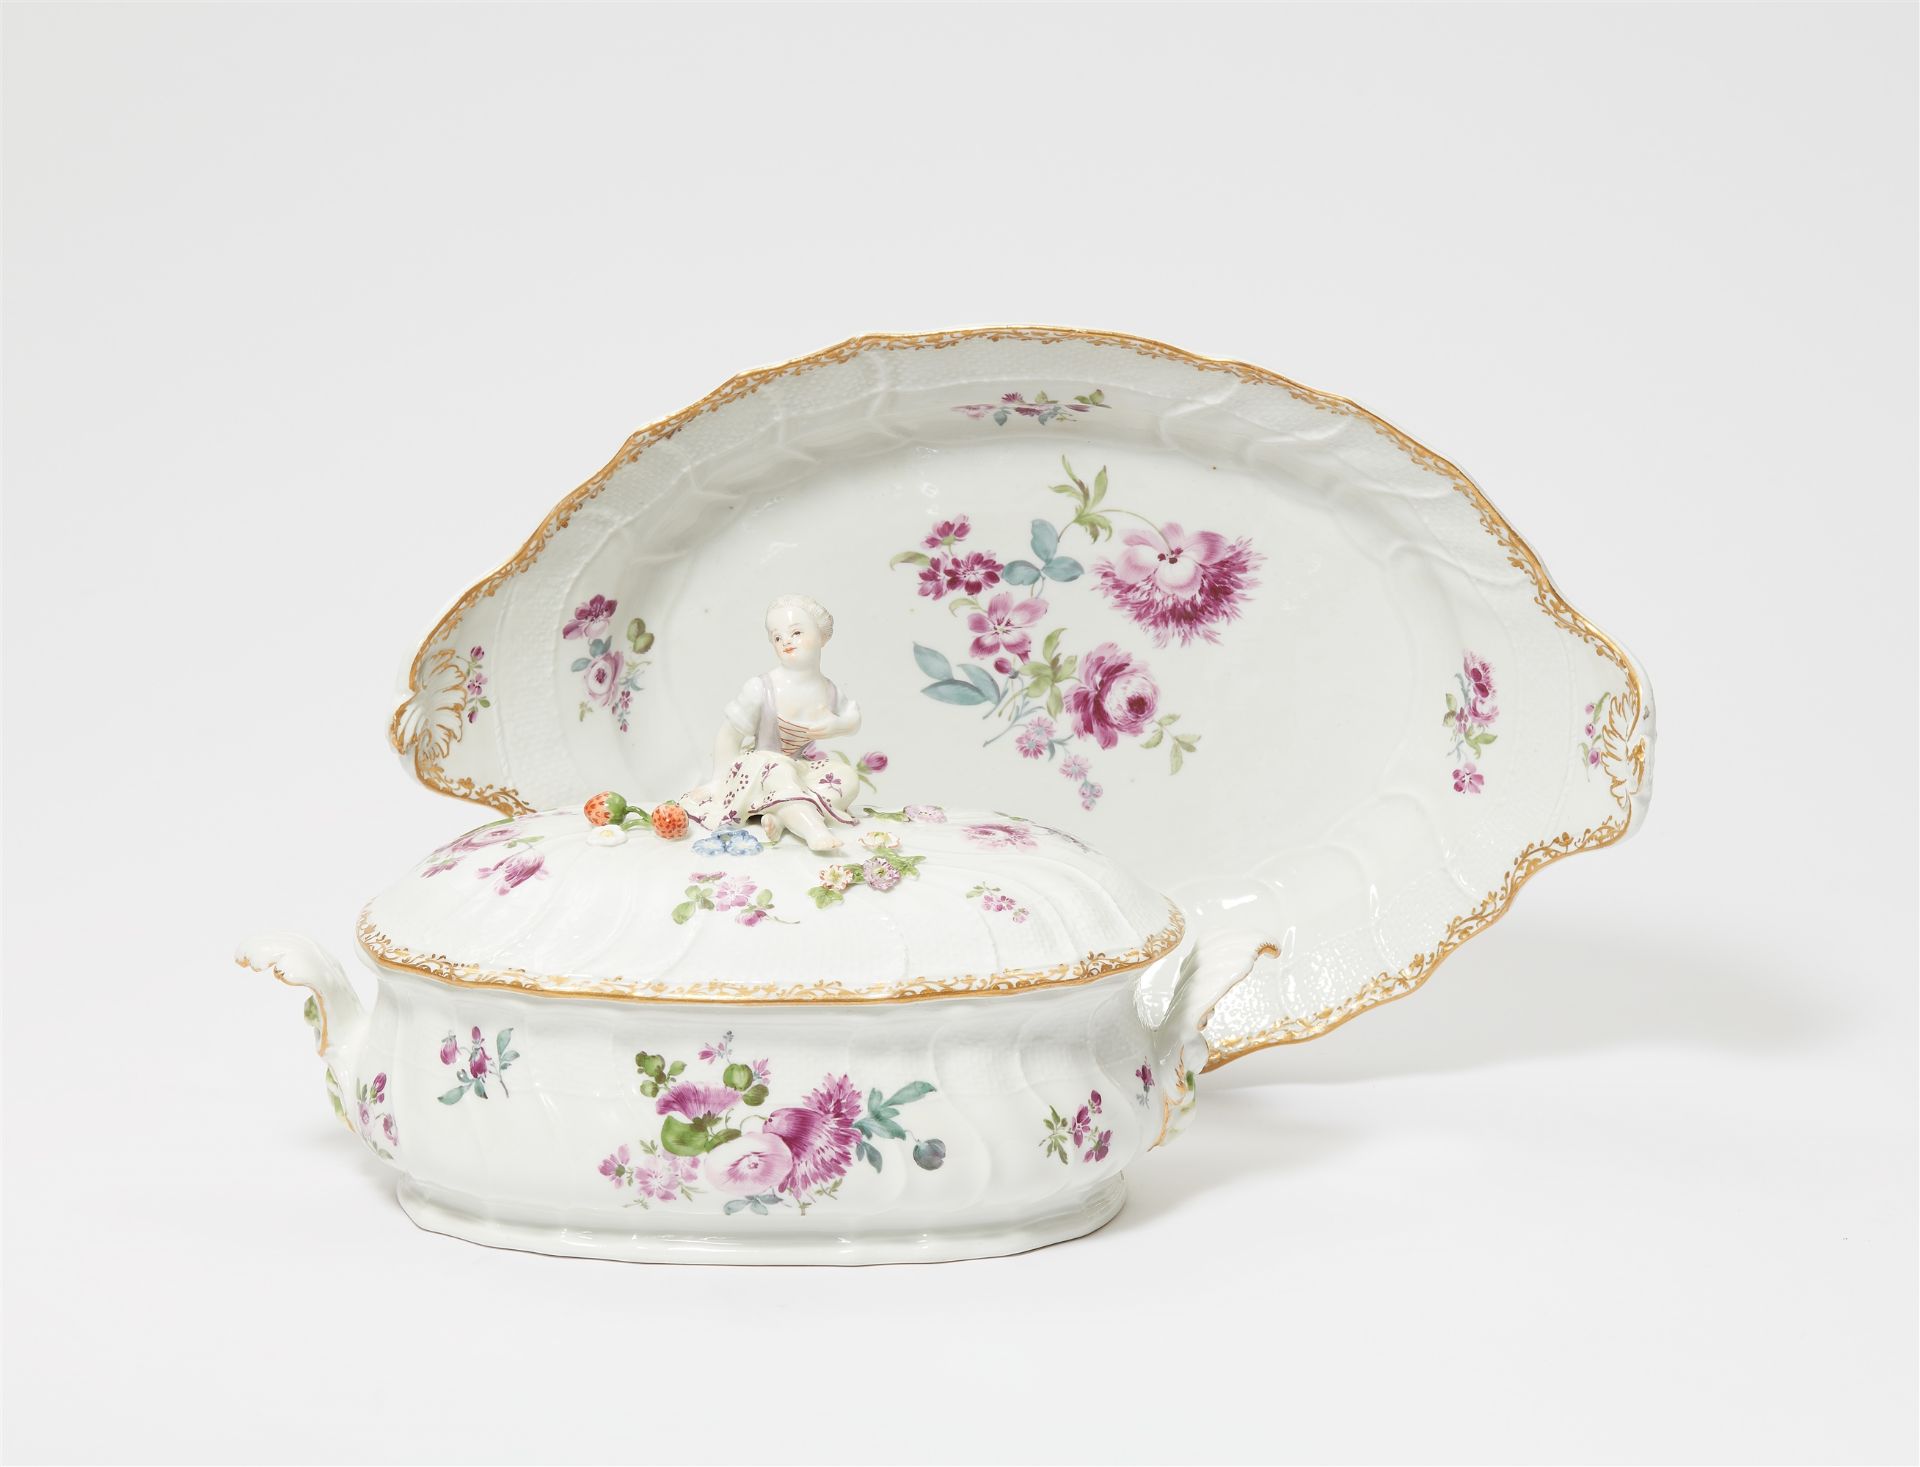 A Meissen porcelain tureen and stand from a dinner service for King Frederick II